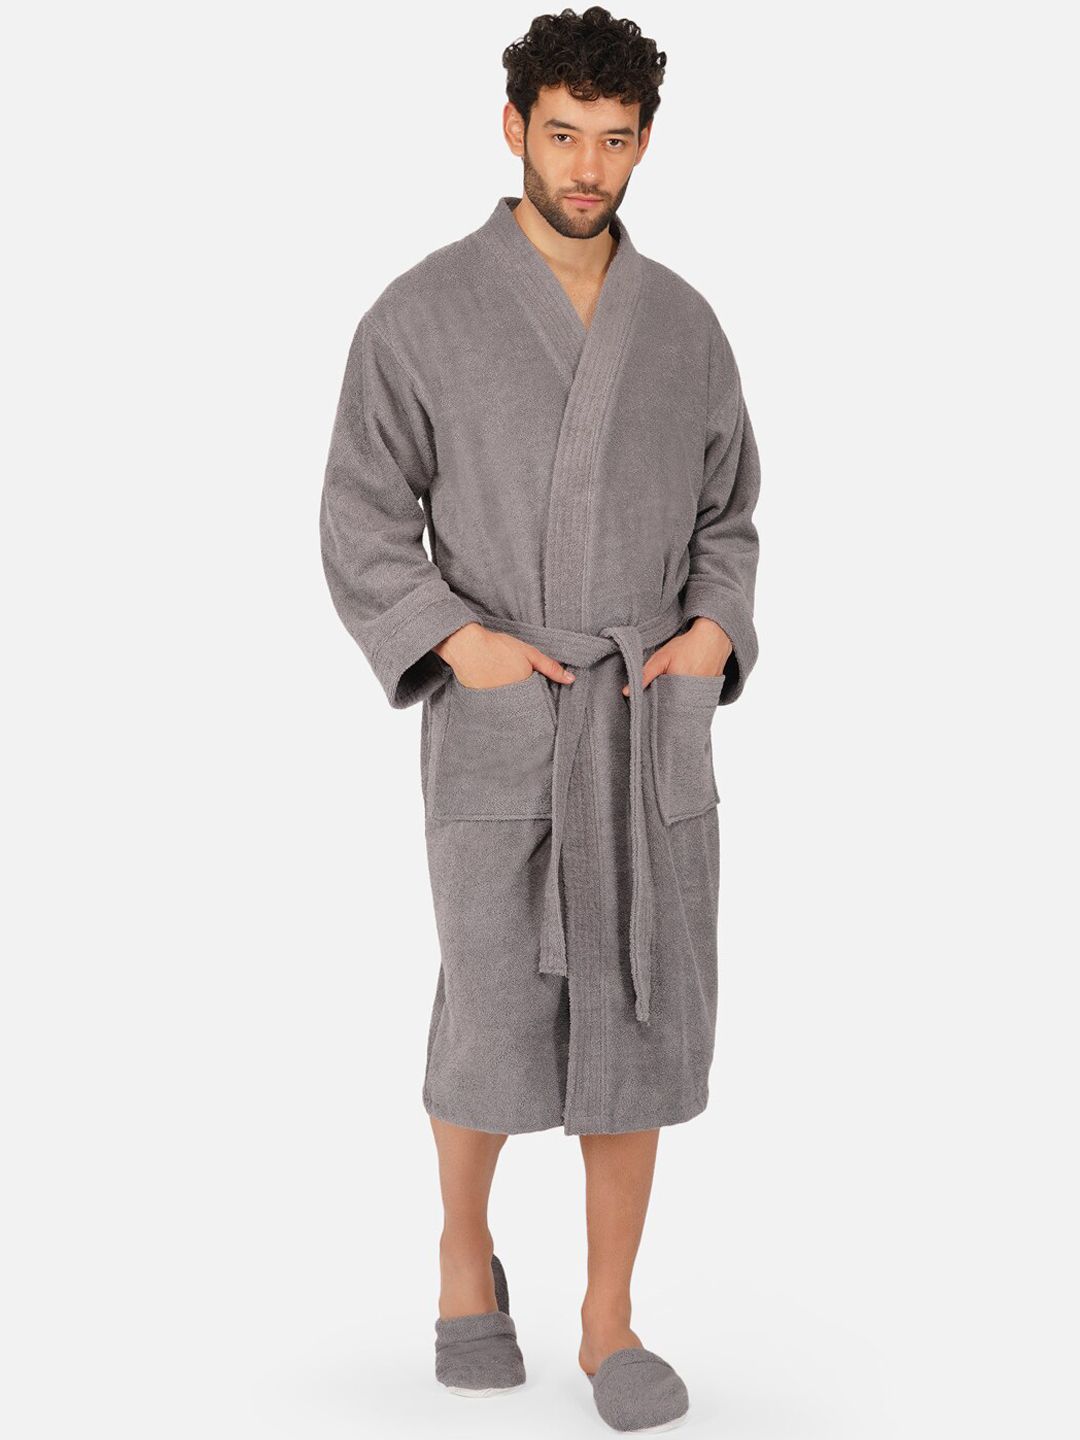 RANGOLI Unisex Grey Pure Cotton 400 GSM Large Bath Robe with Slippers Price in India